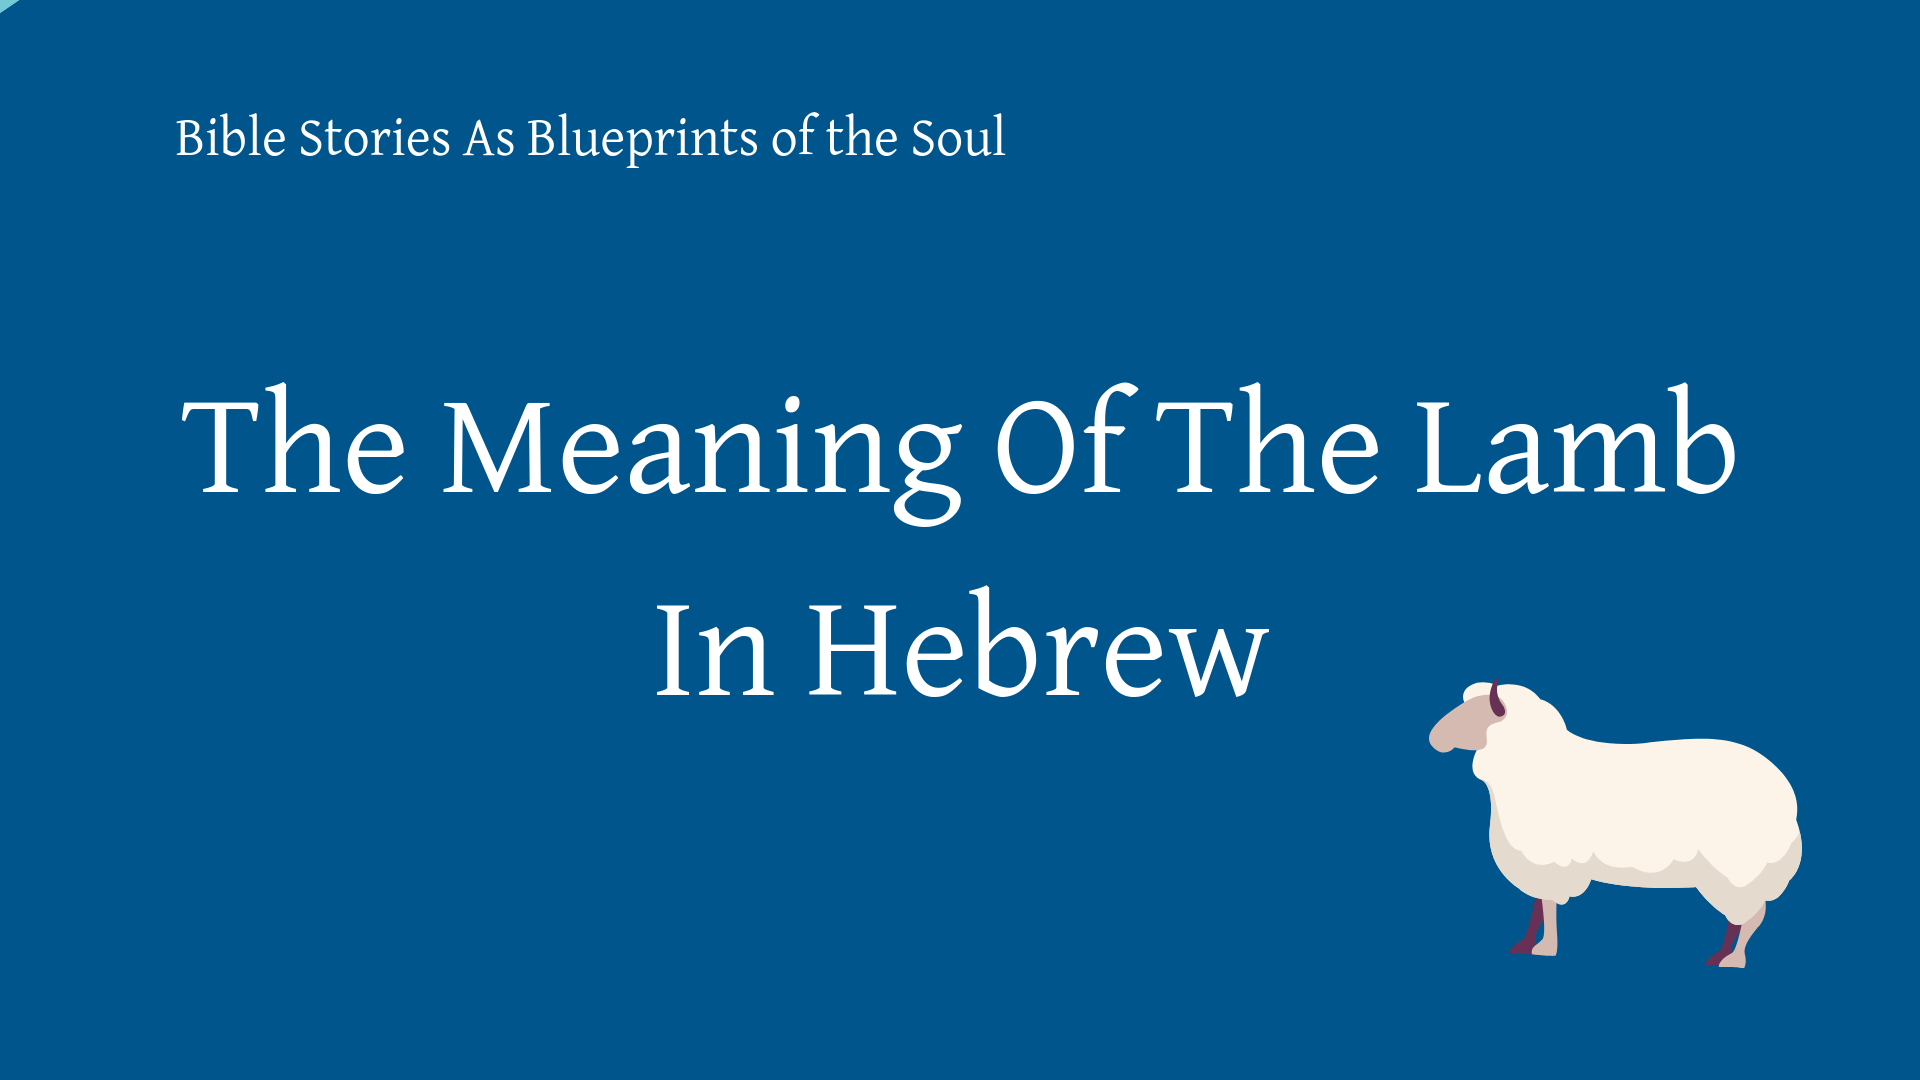 The Meaning Of The Lamb In Hebrew - Bible Stories As Blueprints of the Soul